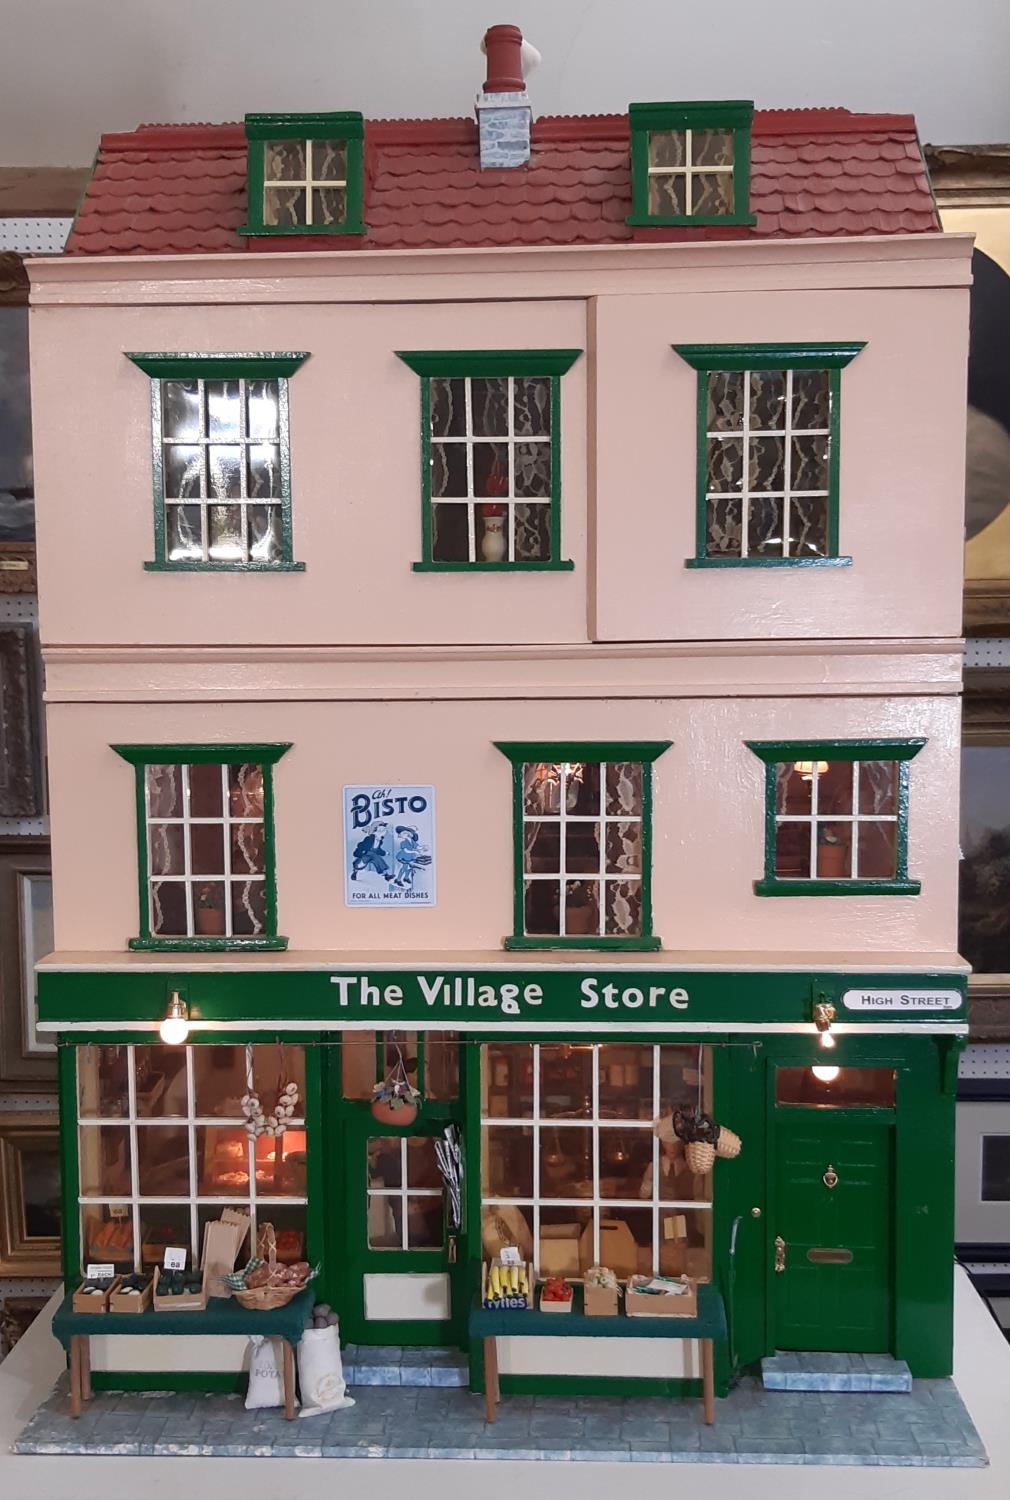 'The Village Store'- an impressive and finely detailed dolls house shop in early to mid 20th century